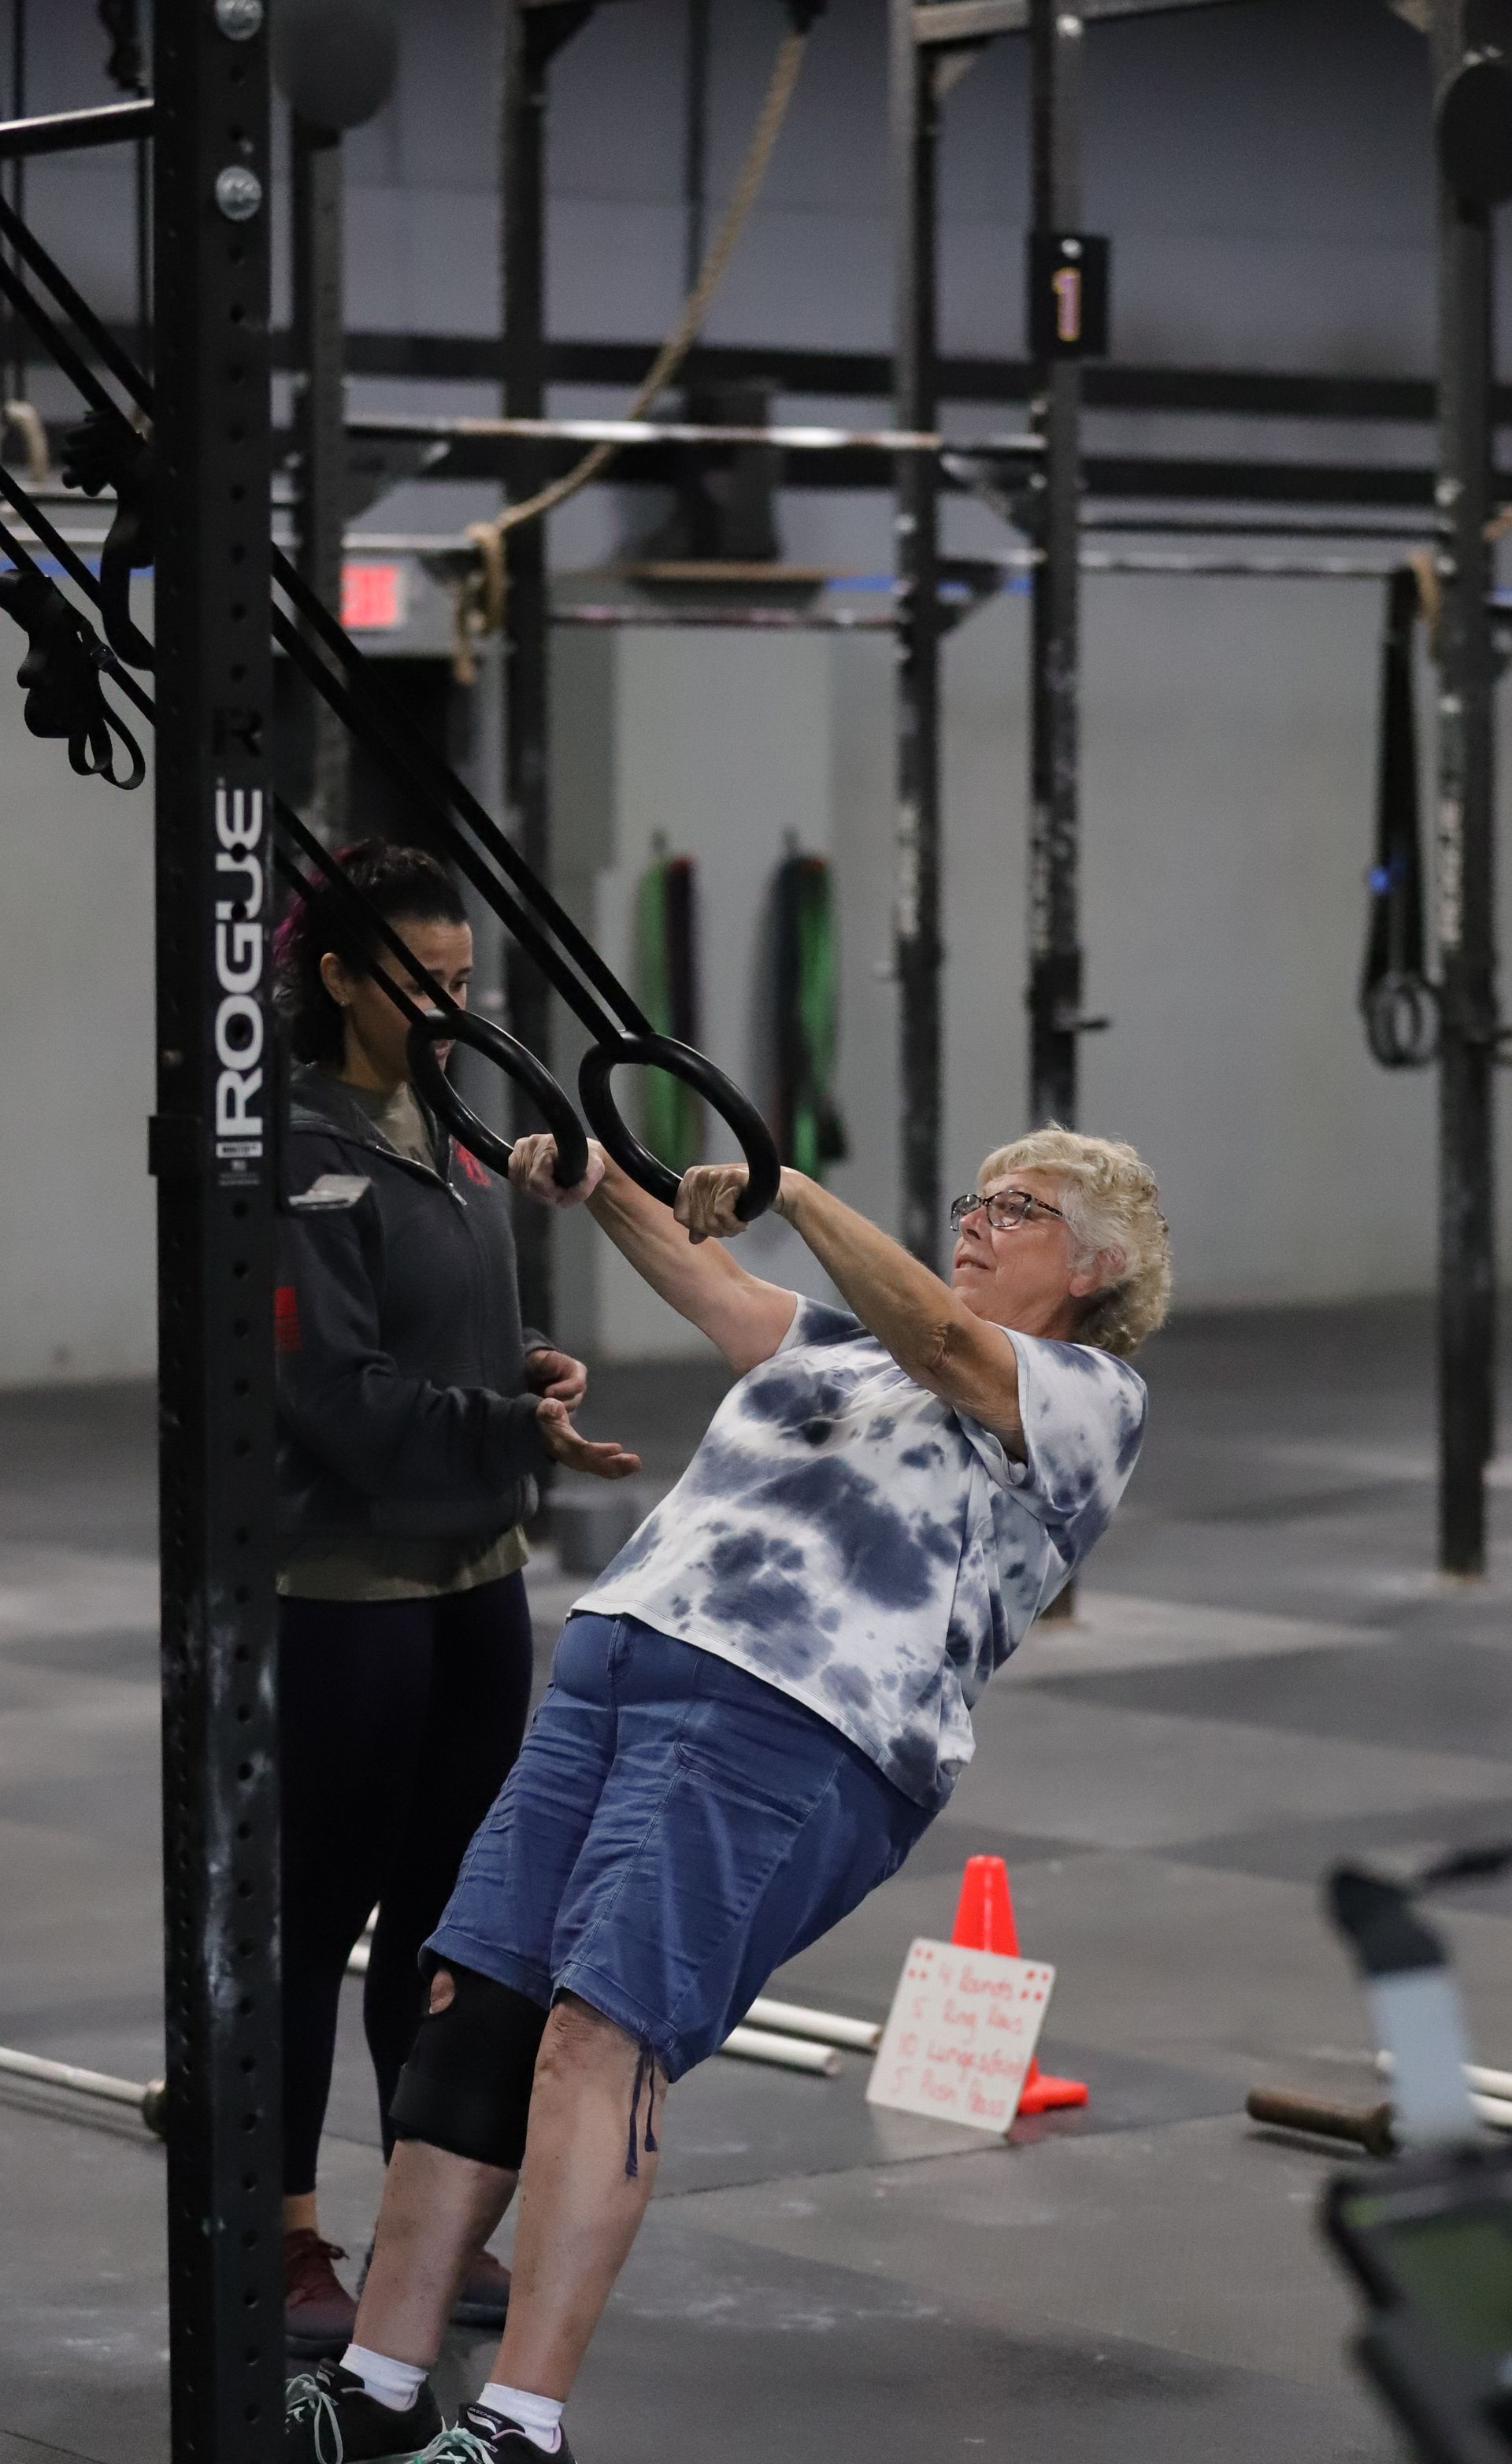 A woman coaching another woman through the ring row.